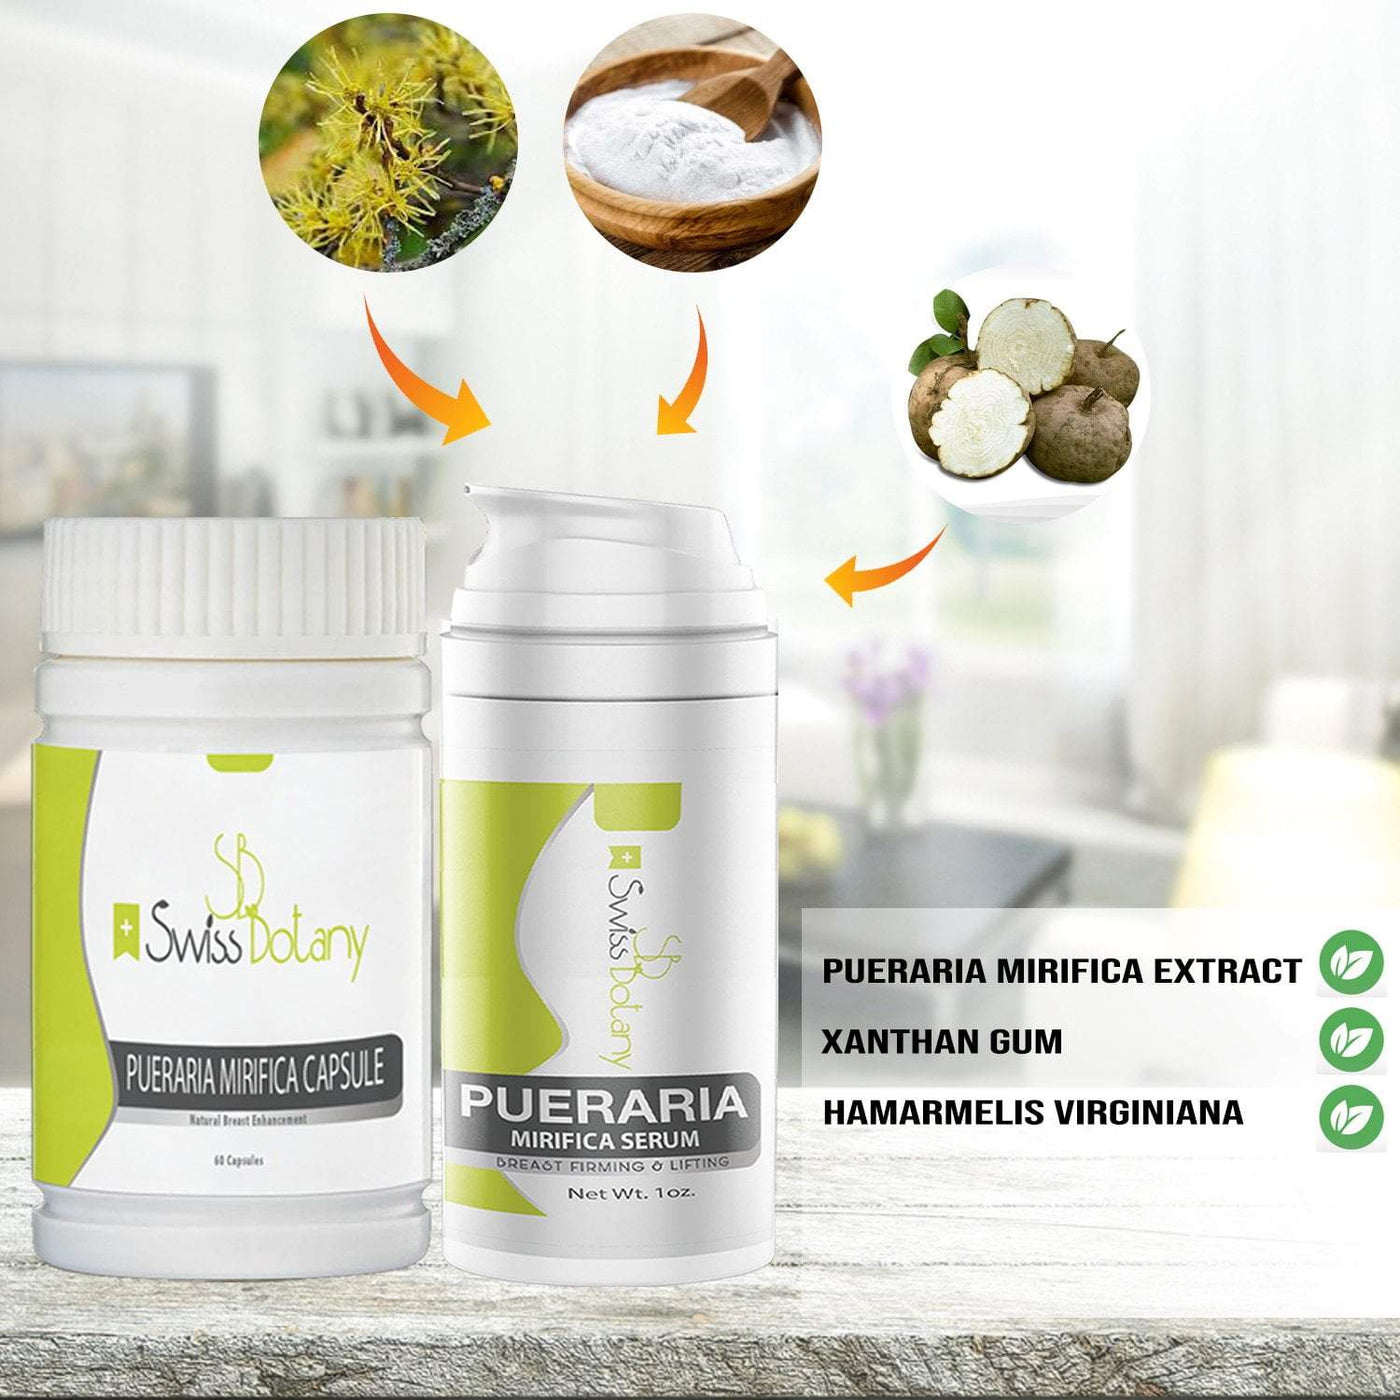 swissbotany Pueraria Mirifica Natural Breast Enhancement Serum + Capsules used for nature's breast lift & growth 1 month supply